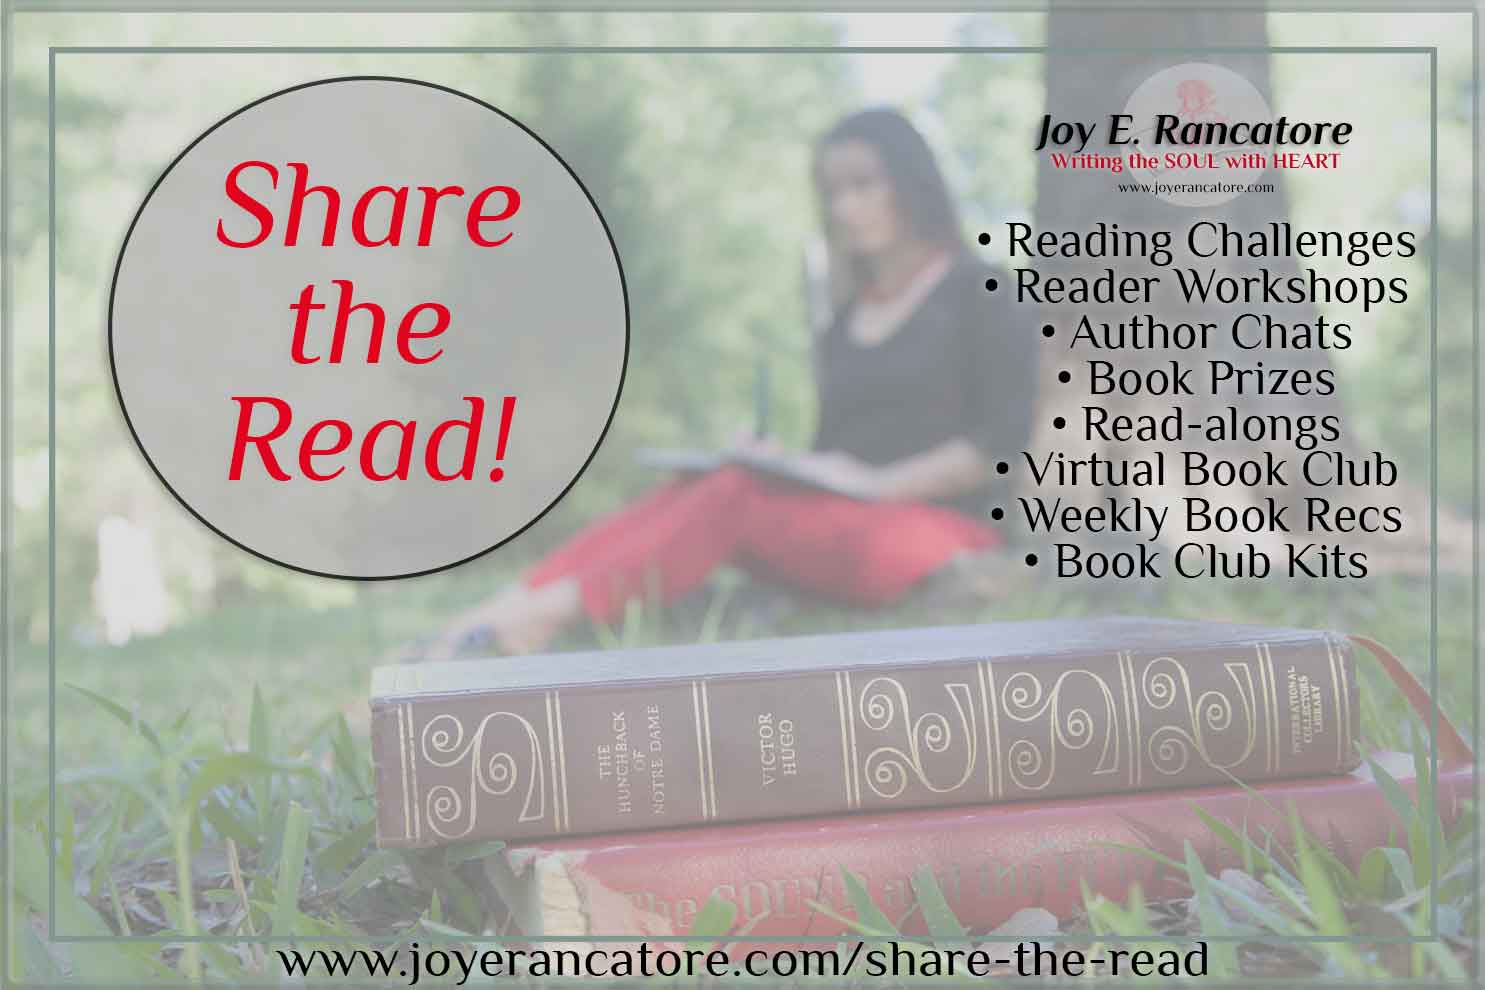 Joy E. Rancatore, award-winning multi-genre Indie Author, loves to read and to share the joy of reading with others. Find out all the Reader Experiences she offers.